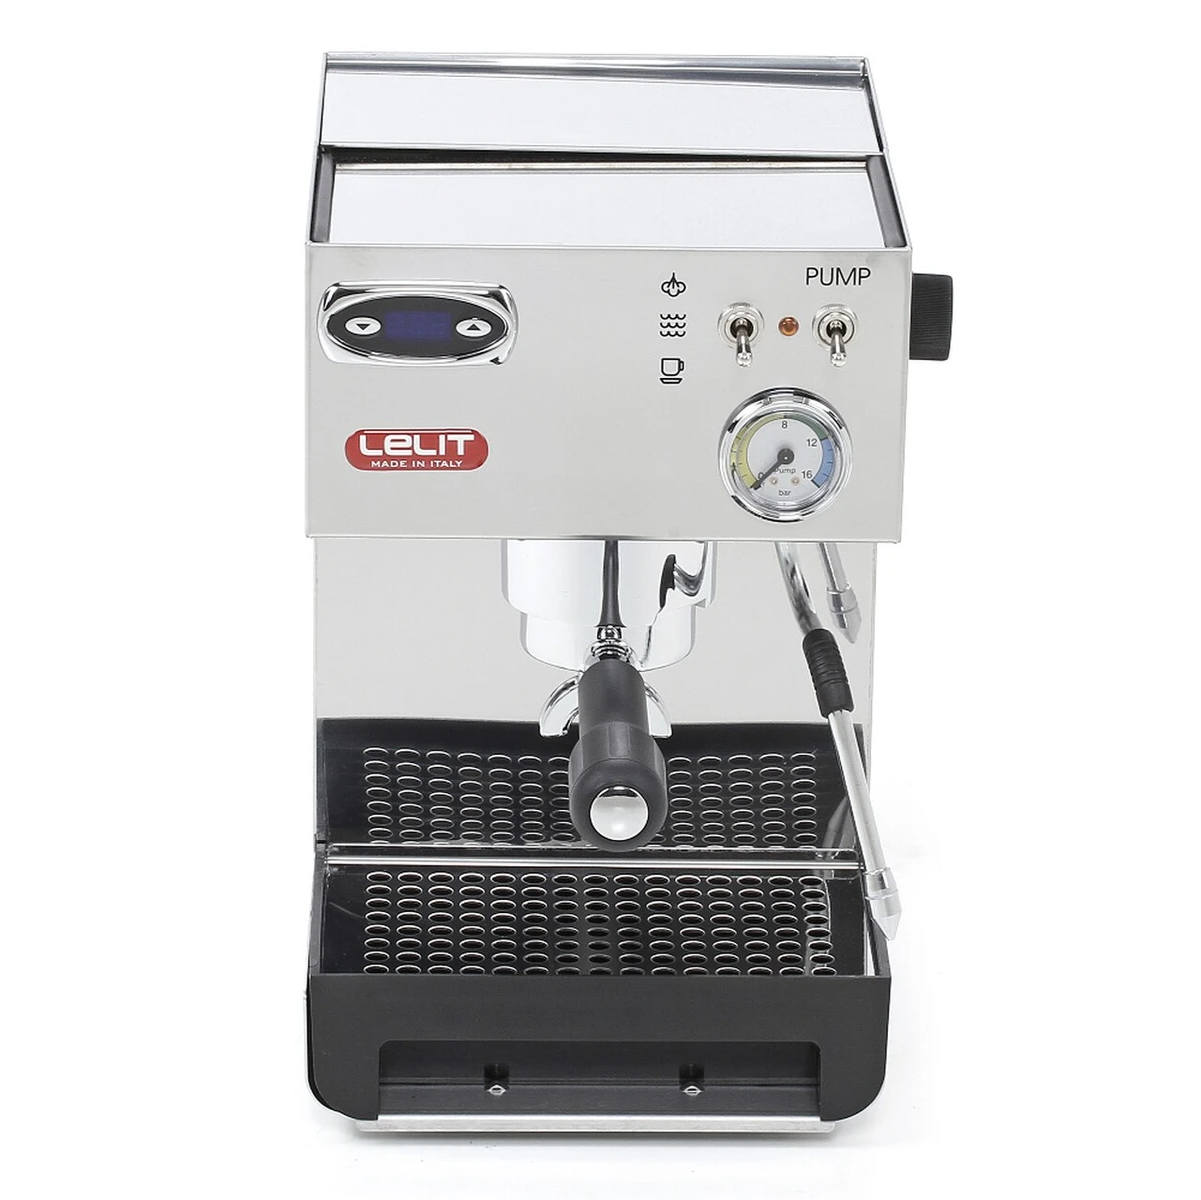 Lelit Anna 2 Espresso Machine With Pid Stainless Steel Pl41tem Home 6343